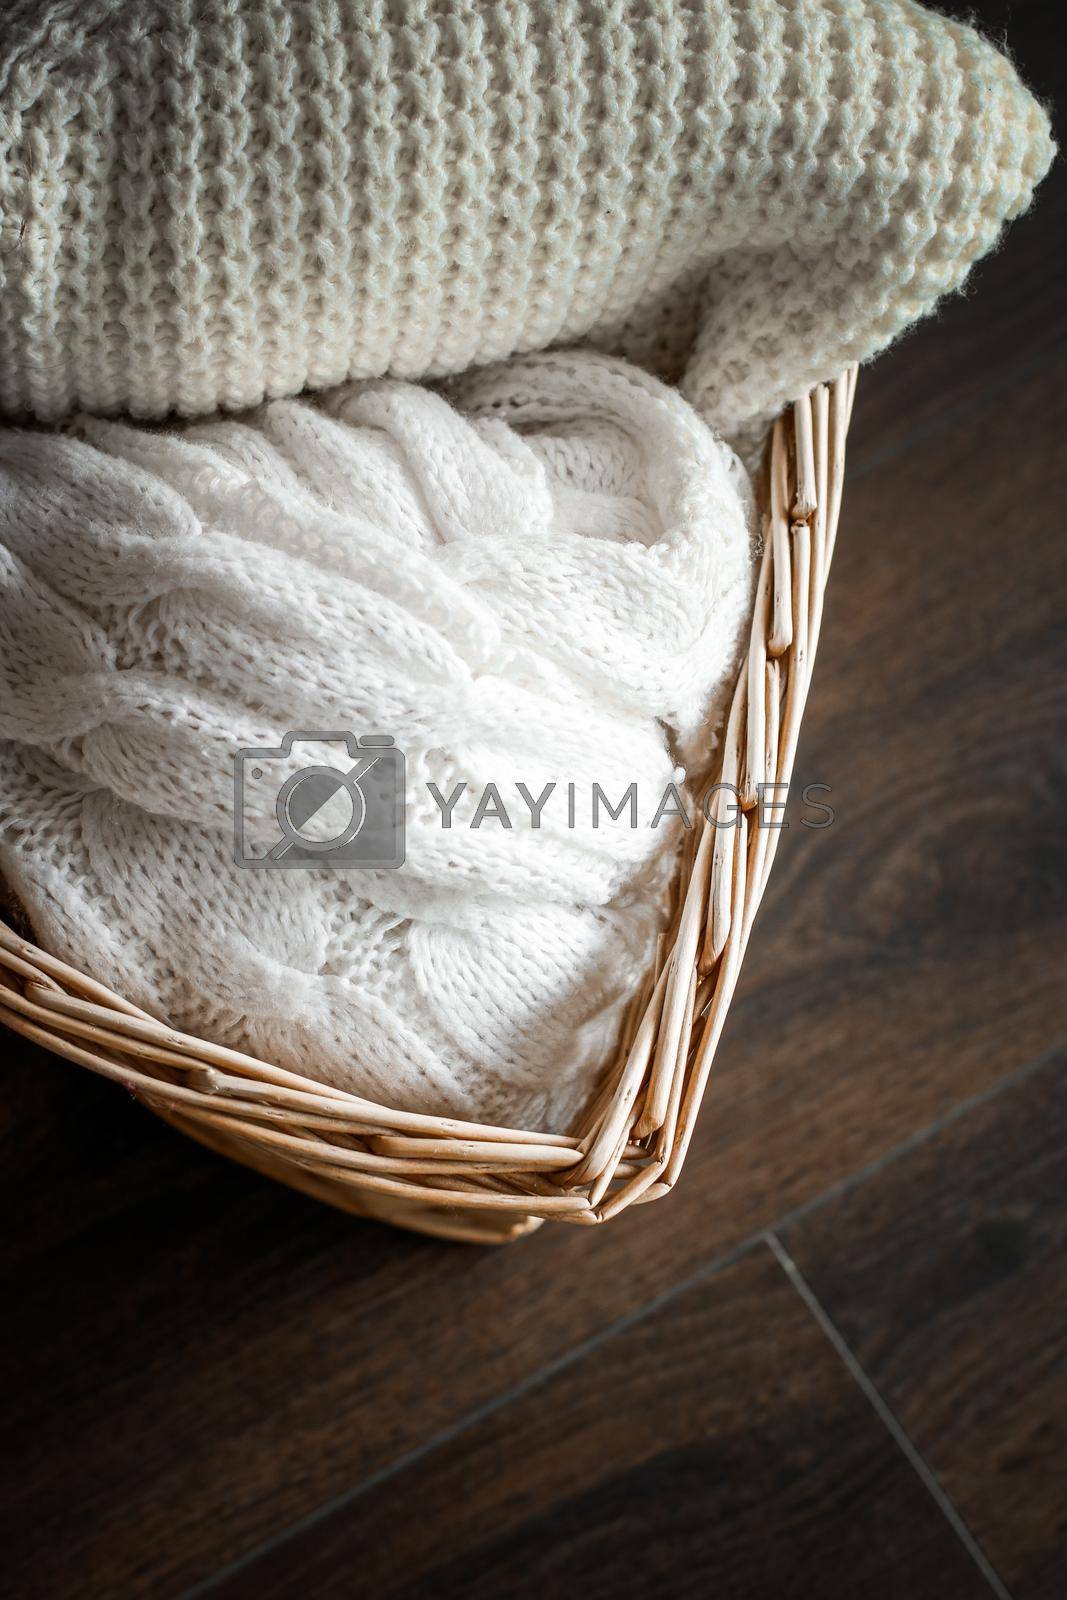 Royalty free image of Knitted winter clothes in a basket by Anneleven